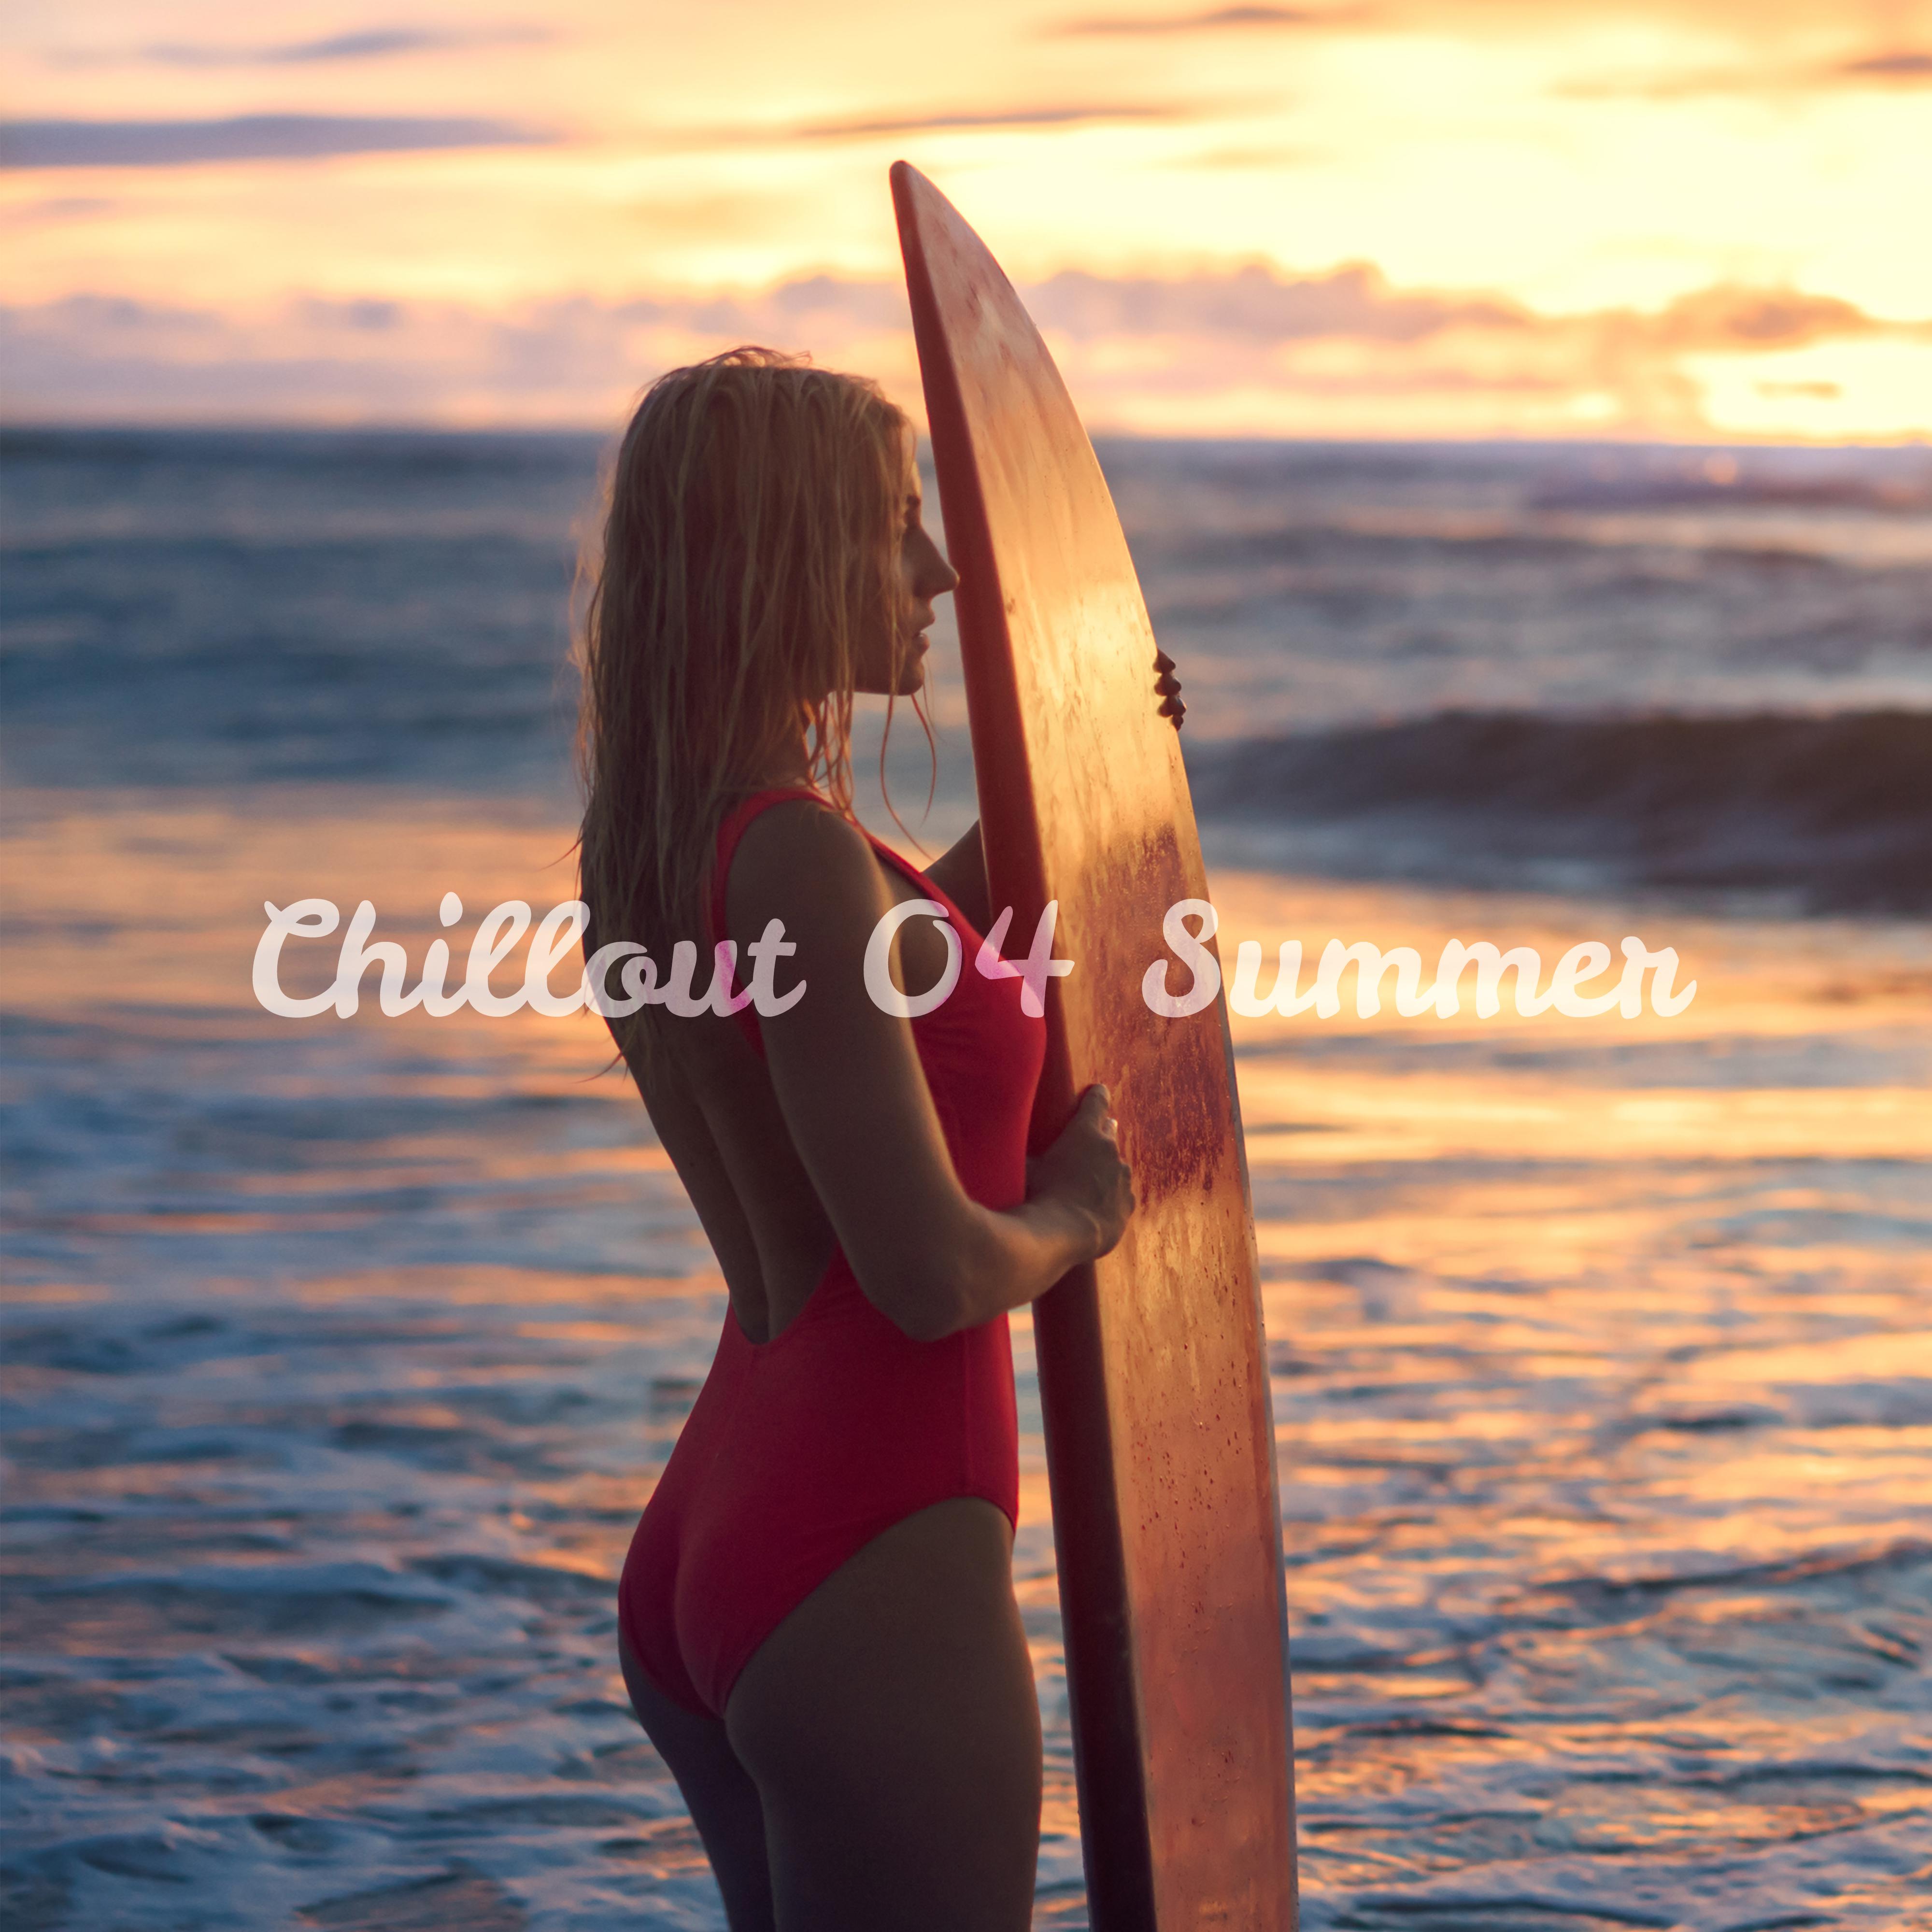 Chillout 04 Summer